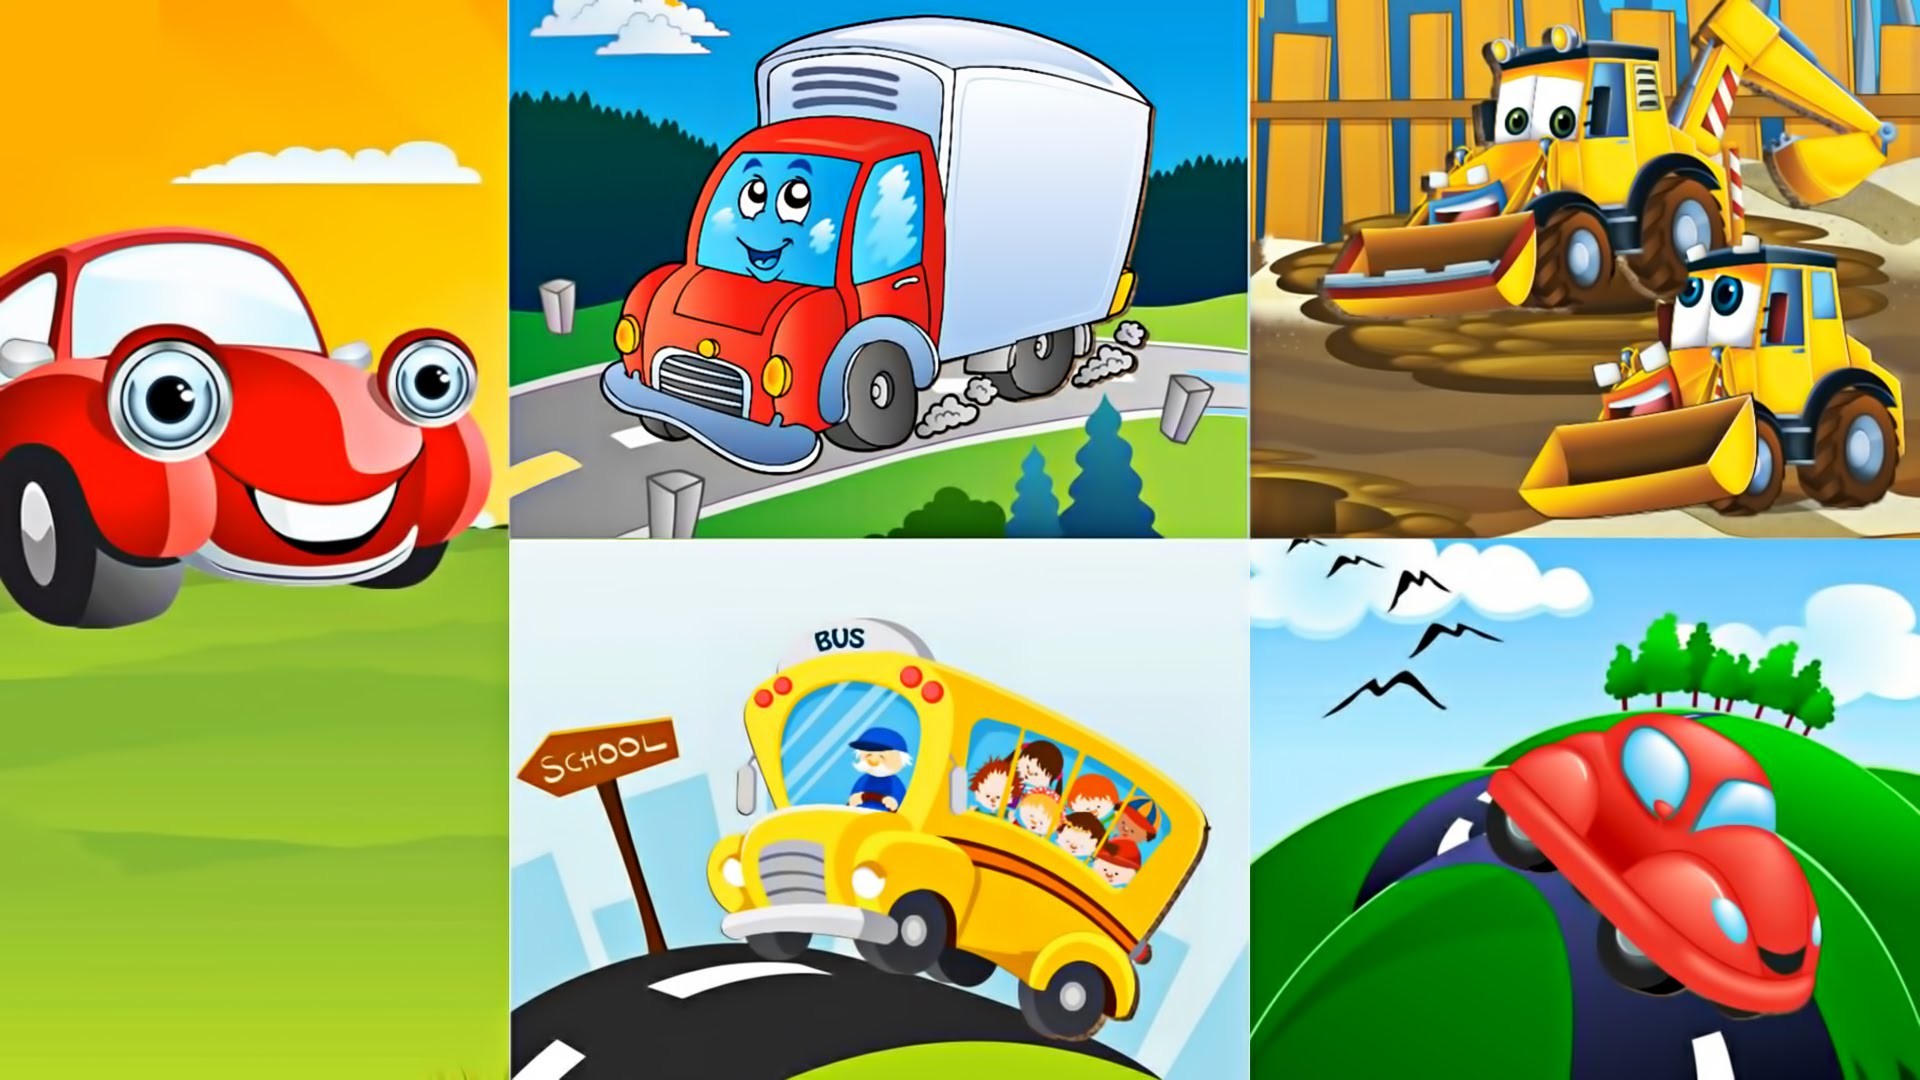 1920x1080 Children's cartoon about Cars - Learn Transportation: School bus, car,  tractor - YouTube